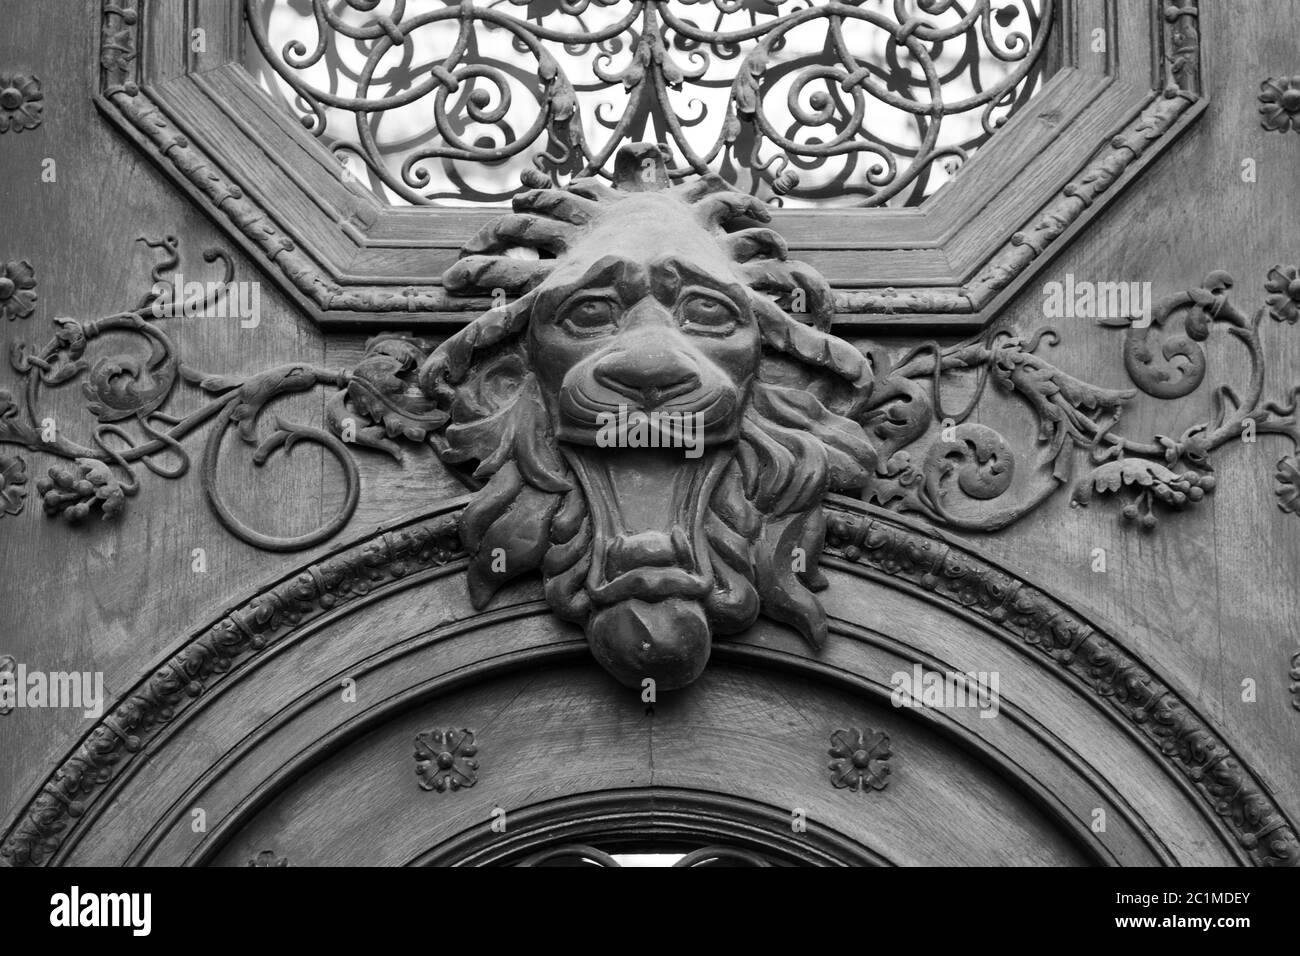 brass lion head on the door, black and white Stock Photo